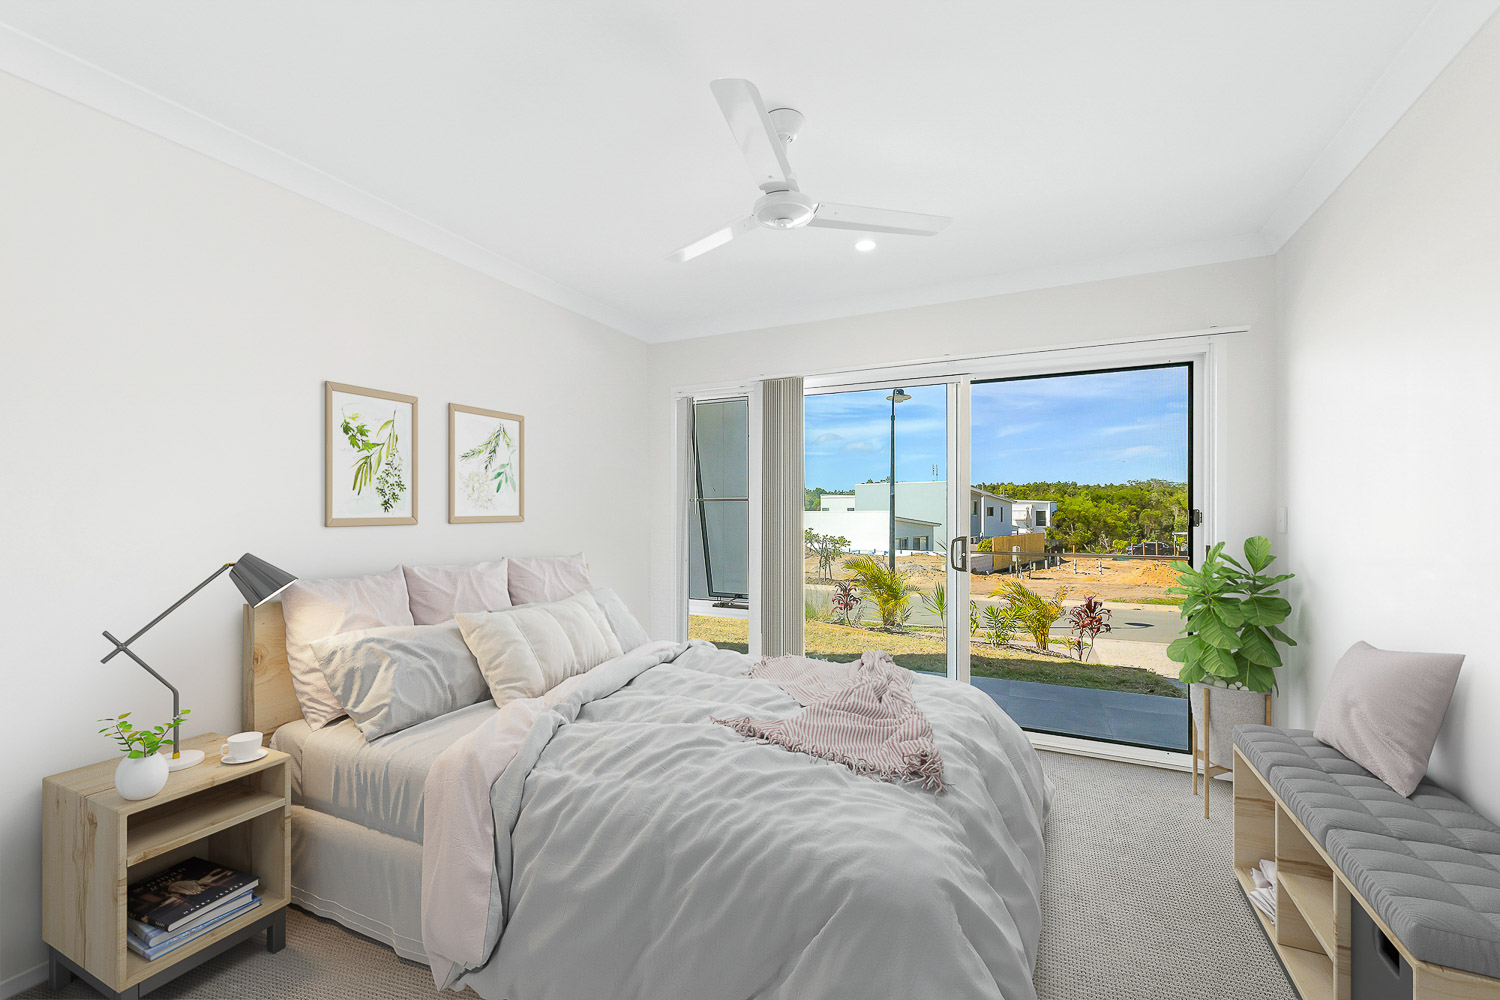 Sunshine property photos, replace existing furniture with virtual staging. Quality results will be sure to bring the buyers in. Sell your home faster and get the attention you need. Market your property today with fast turnaround on all images.